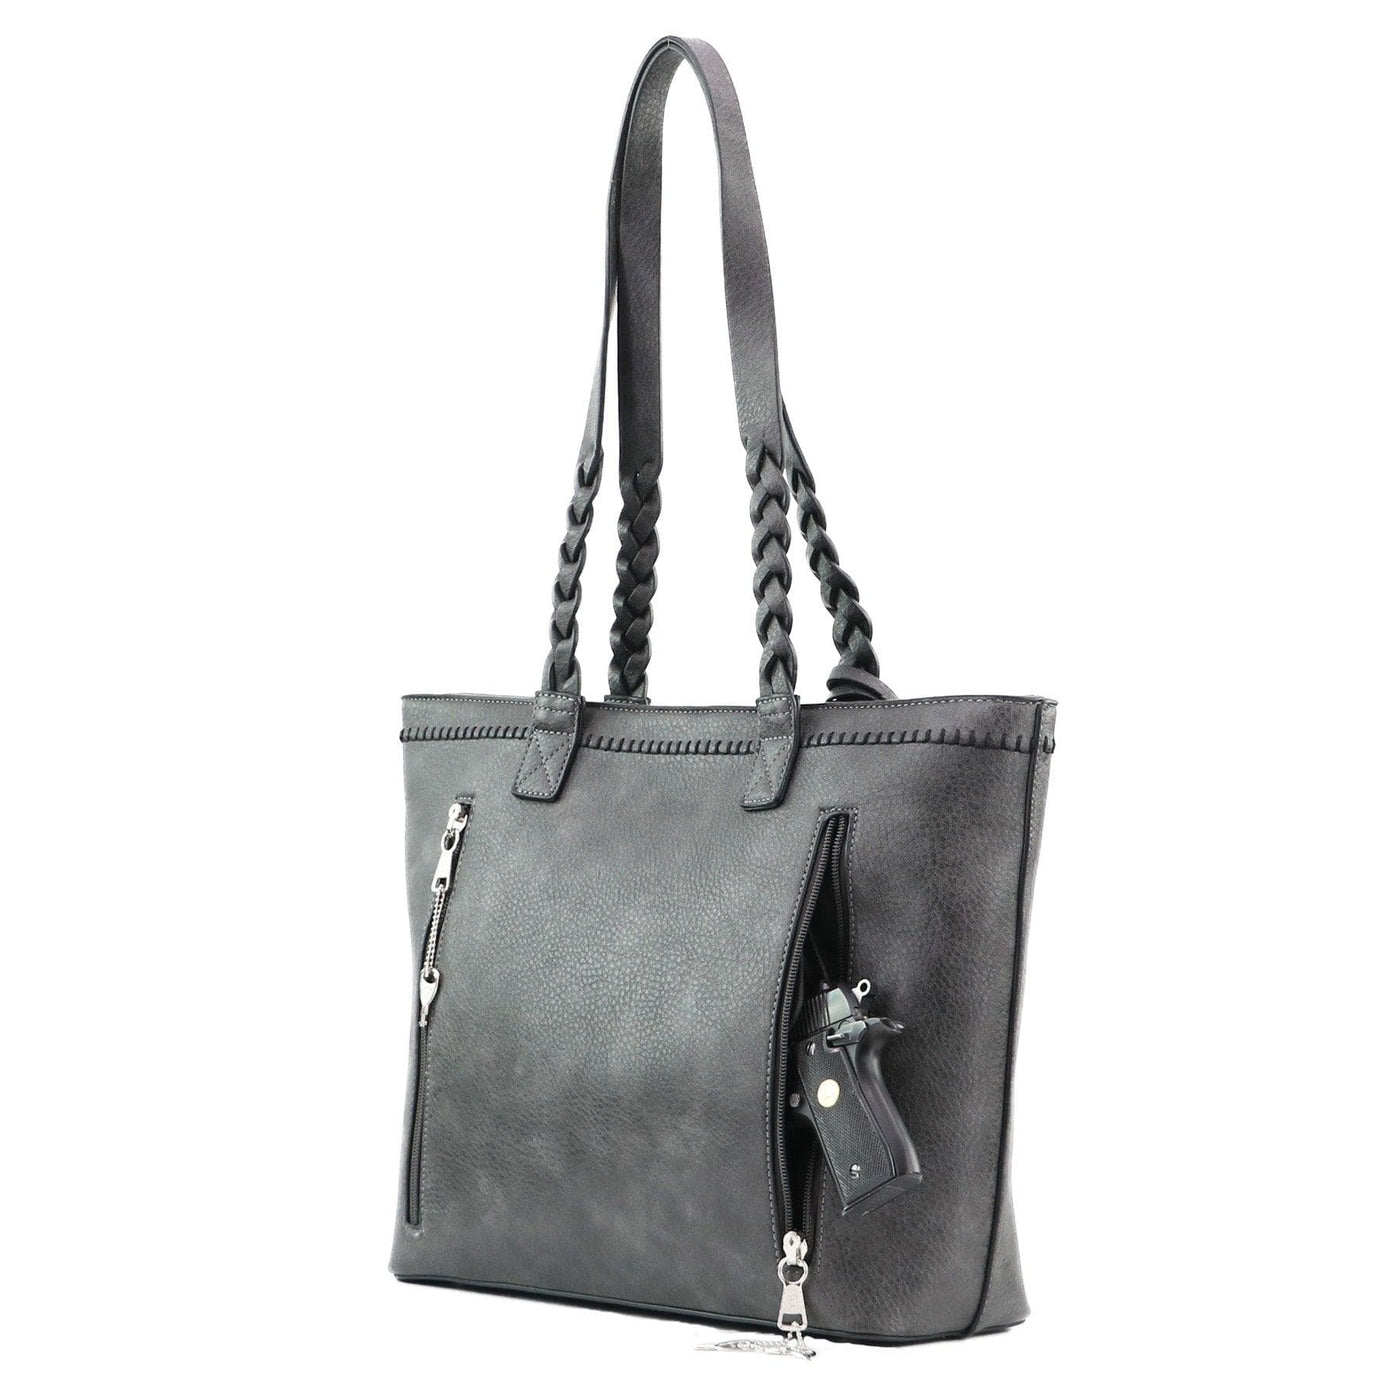 Concealed Carry Cora Tote by Lady Conceal -  Locking Designer Conceal Carry Handbag for women -   Locking Conceal and Carry Handbag with Universal Holster for Handguns -  Unique Handbag Gun and Pistol Bag - crossbody Handbag for concealed gun carry - concealed carry Handbag gun purse with locking zipper